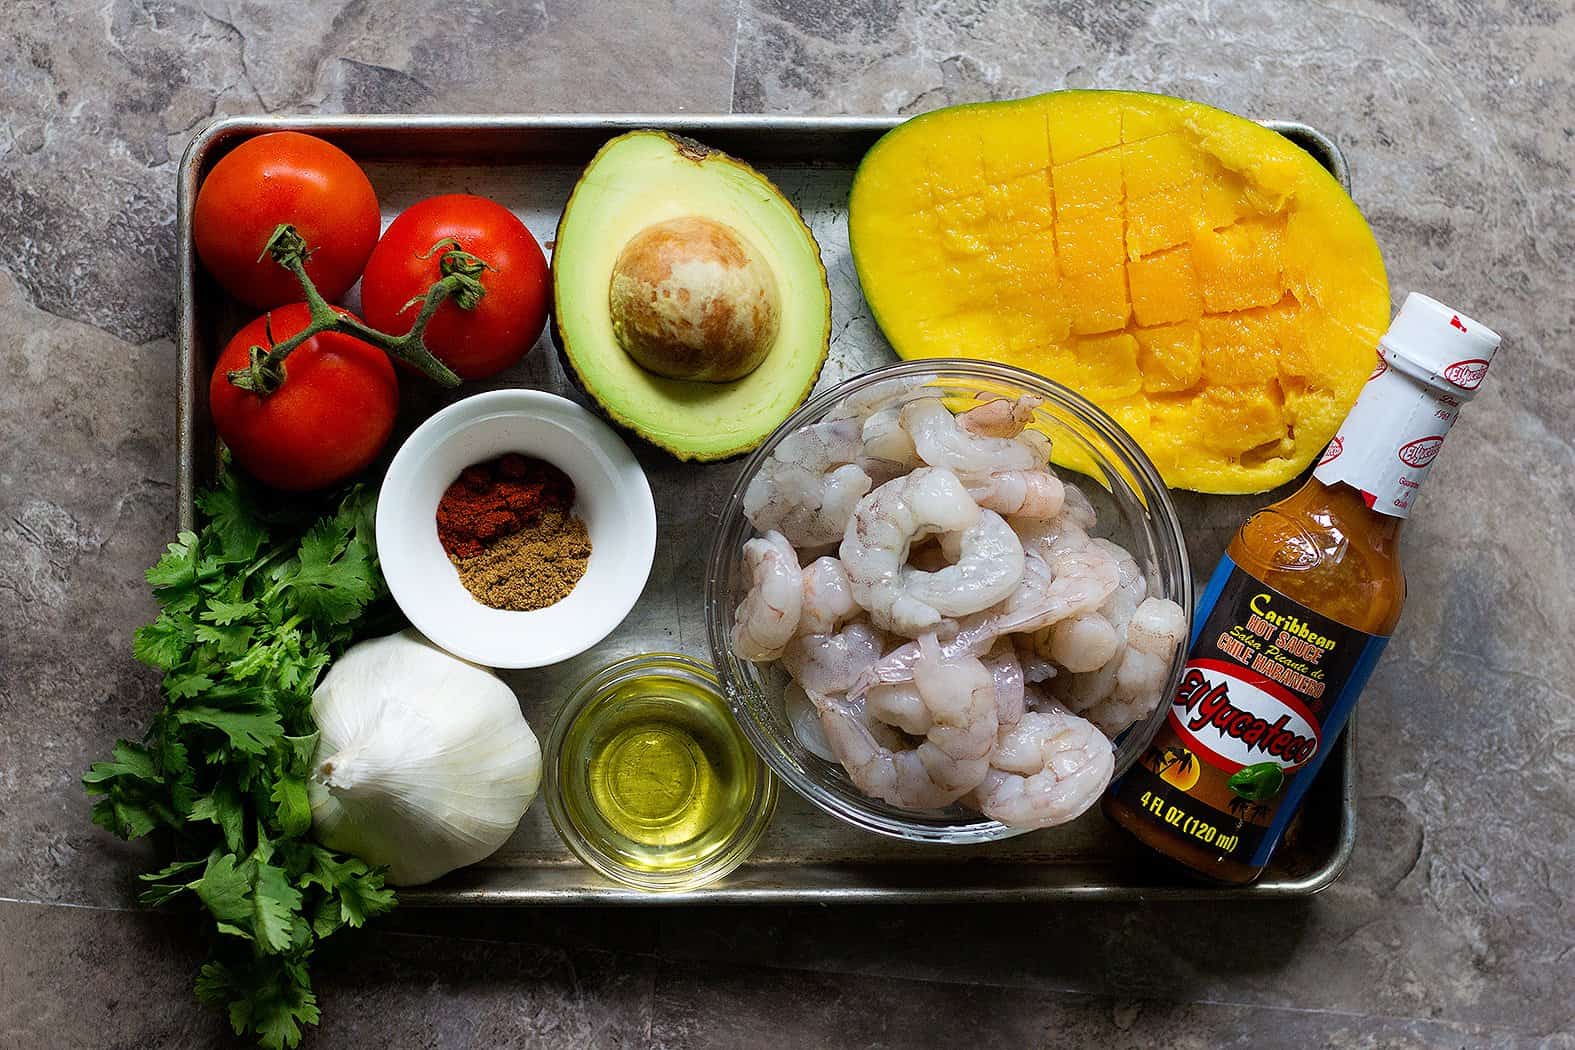 For spicy shrimp tacos you need shrimps, hot sauce, mango, olive oil, spices, garlic and avocado